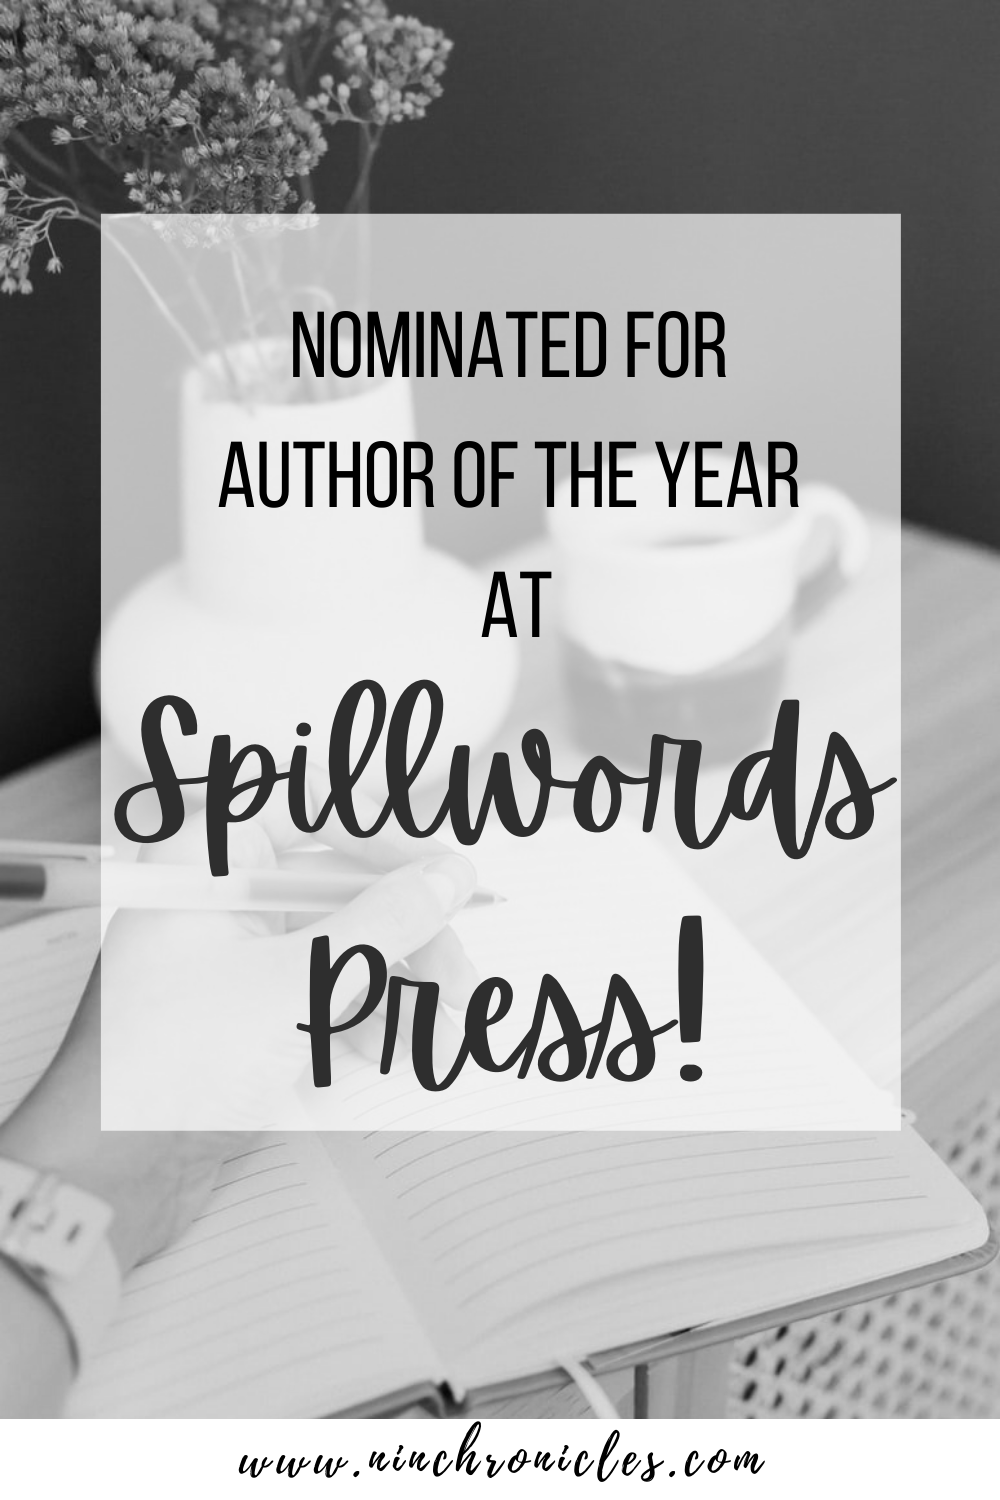 Nominated for Author of the Year at Spillwords Press!